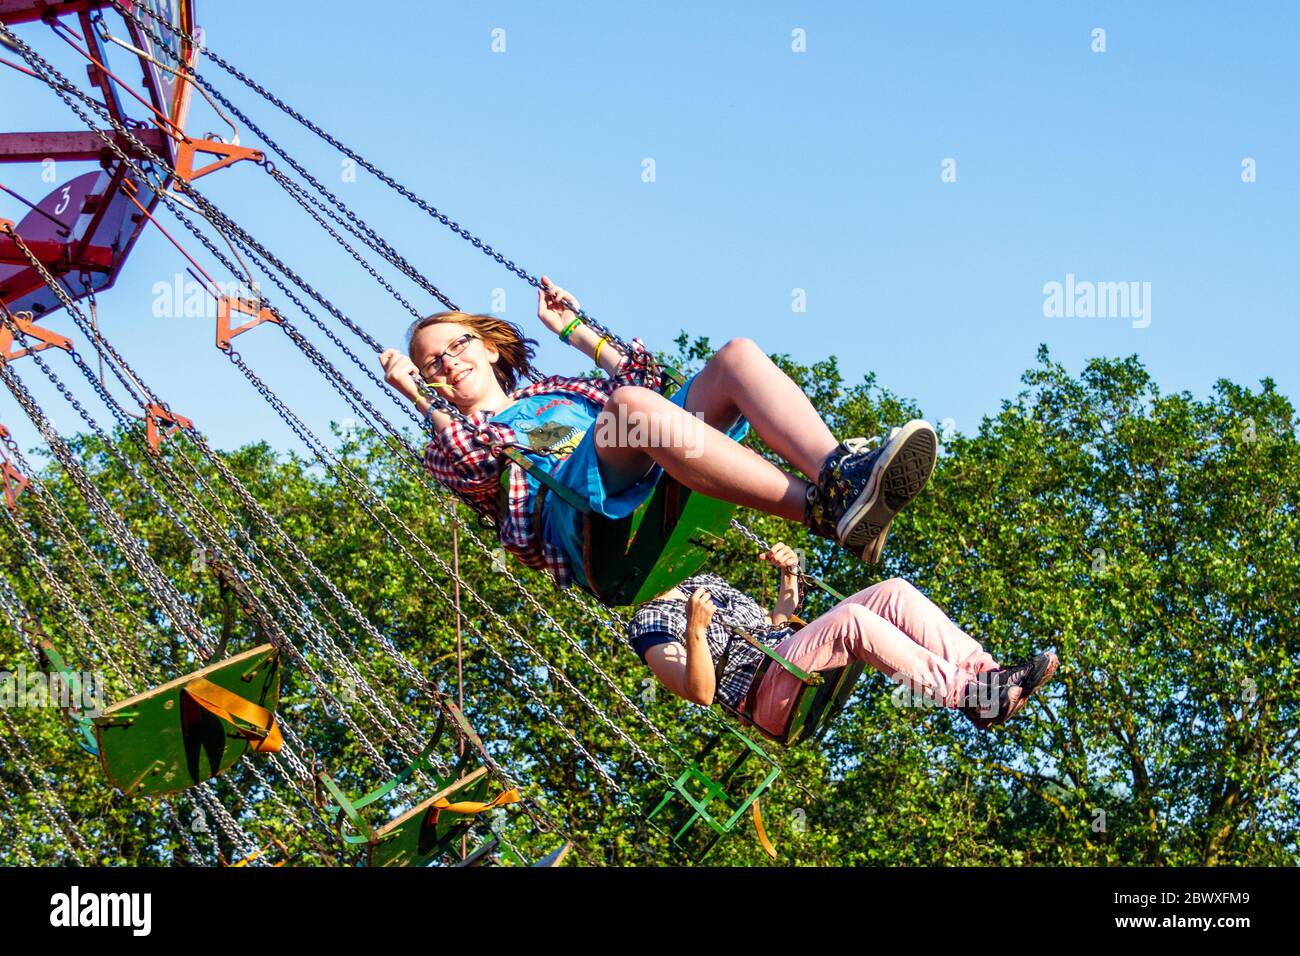 A thirteen year-old girl riding on the swing chairs at a tradition steam fair, London, UK Stock Photo